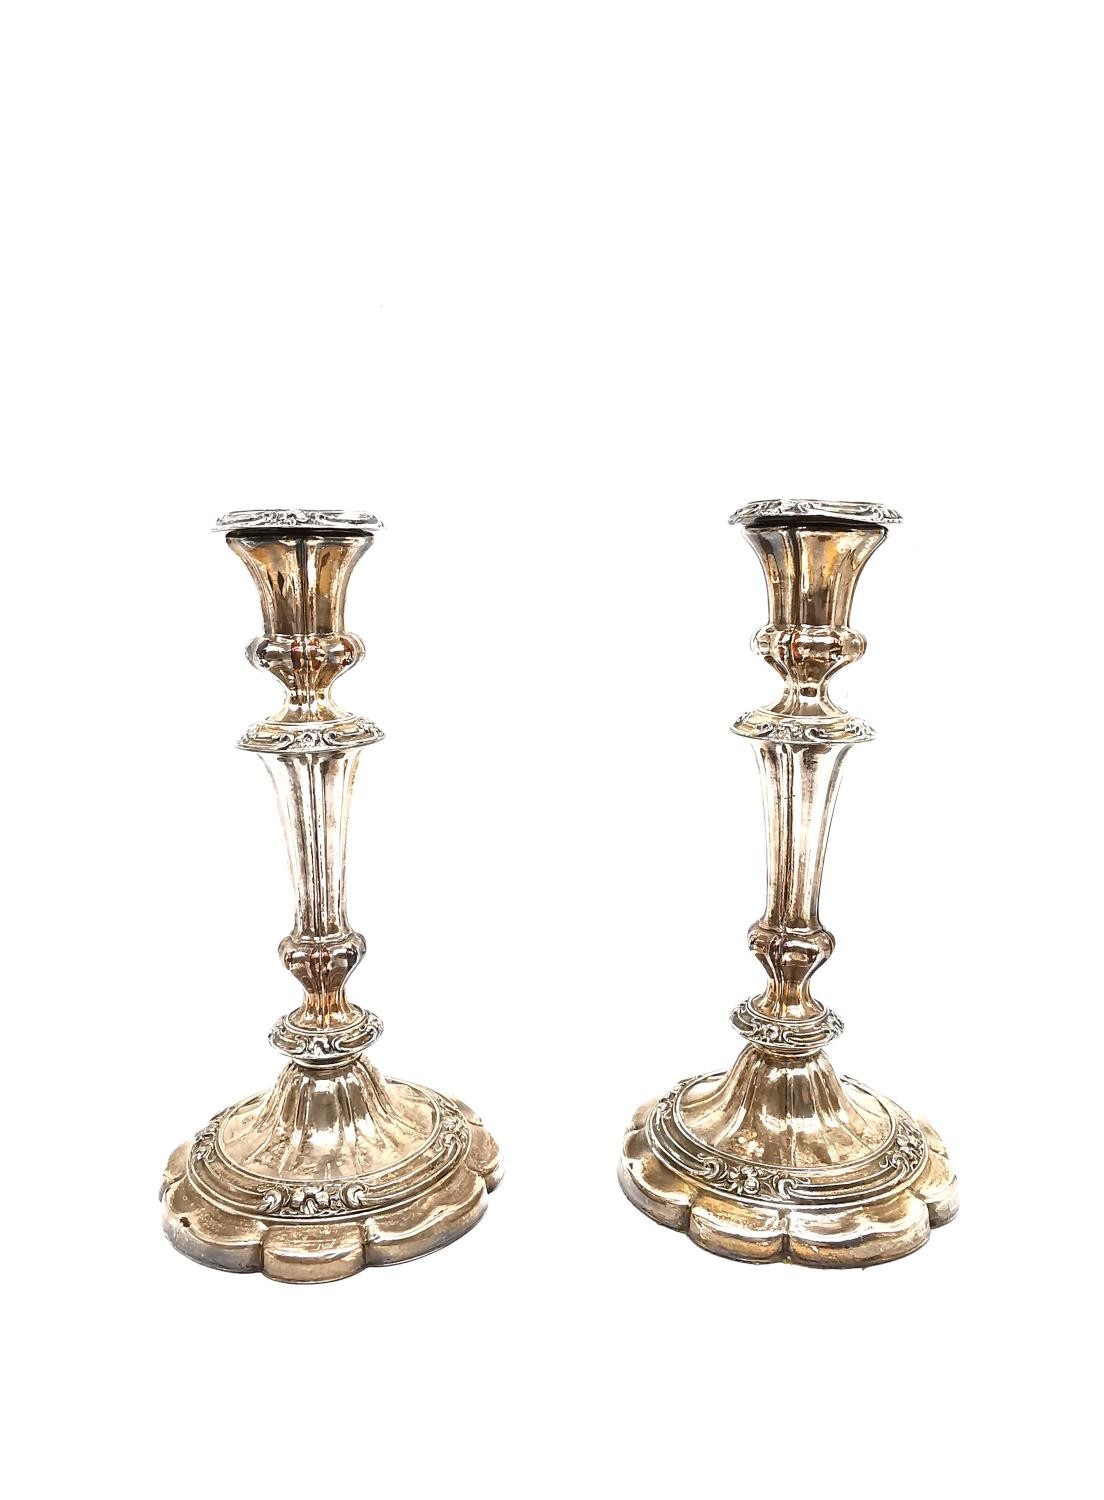 Two pairs of 19th century Sheffield silver plate repousse weighted candlesticks with floral - Image 2 of 5